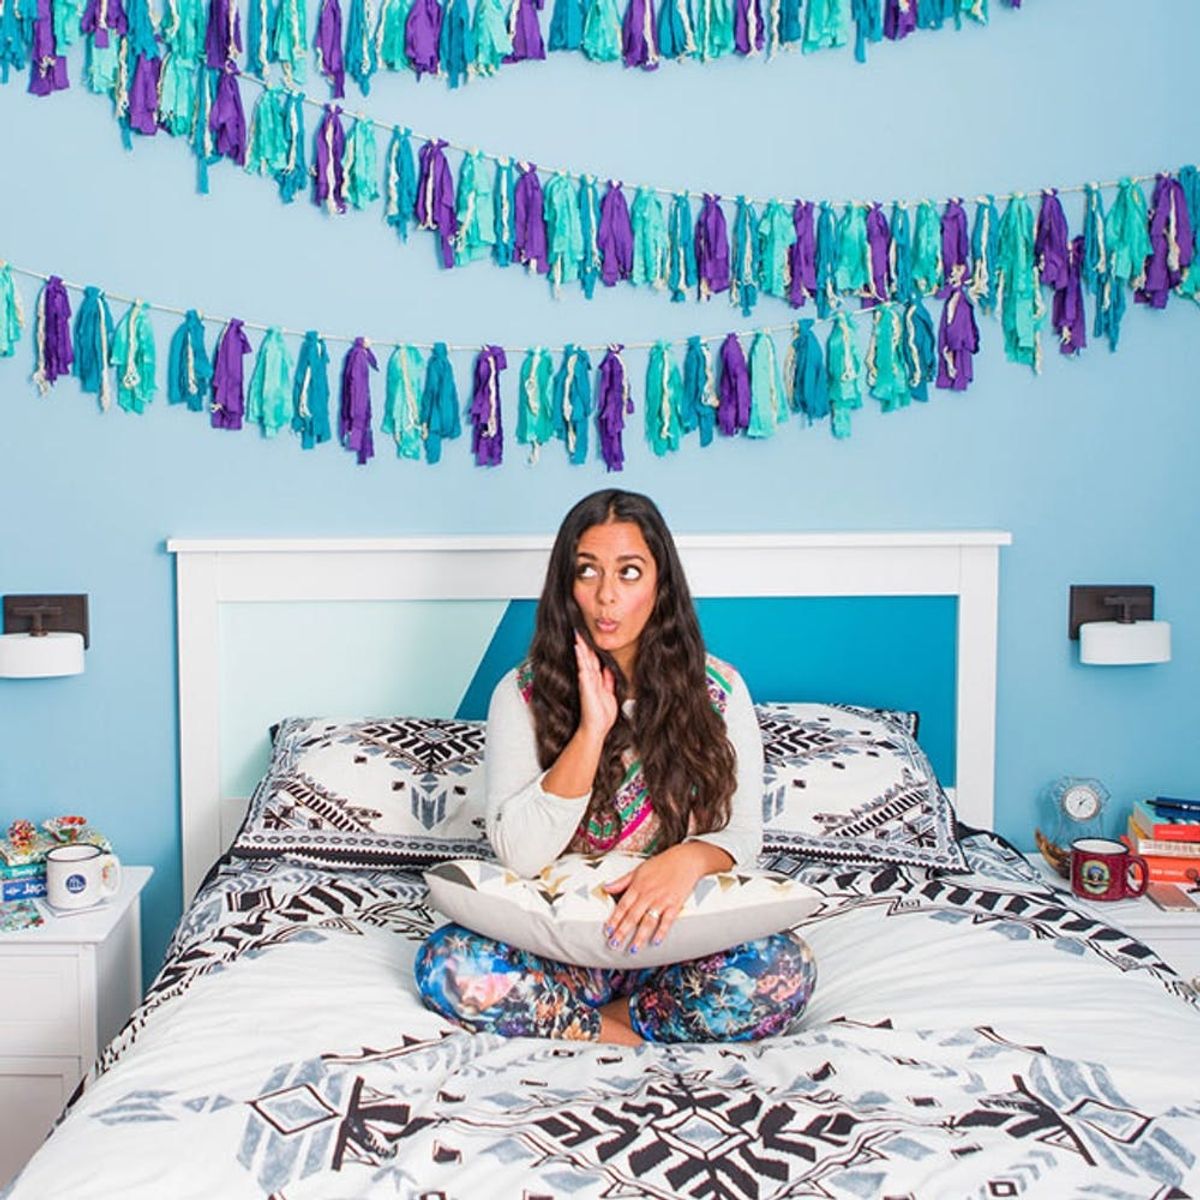 Adulting 101: How to Make Your Bedroom NOT Look Like You’re Still an Undergrad